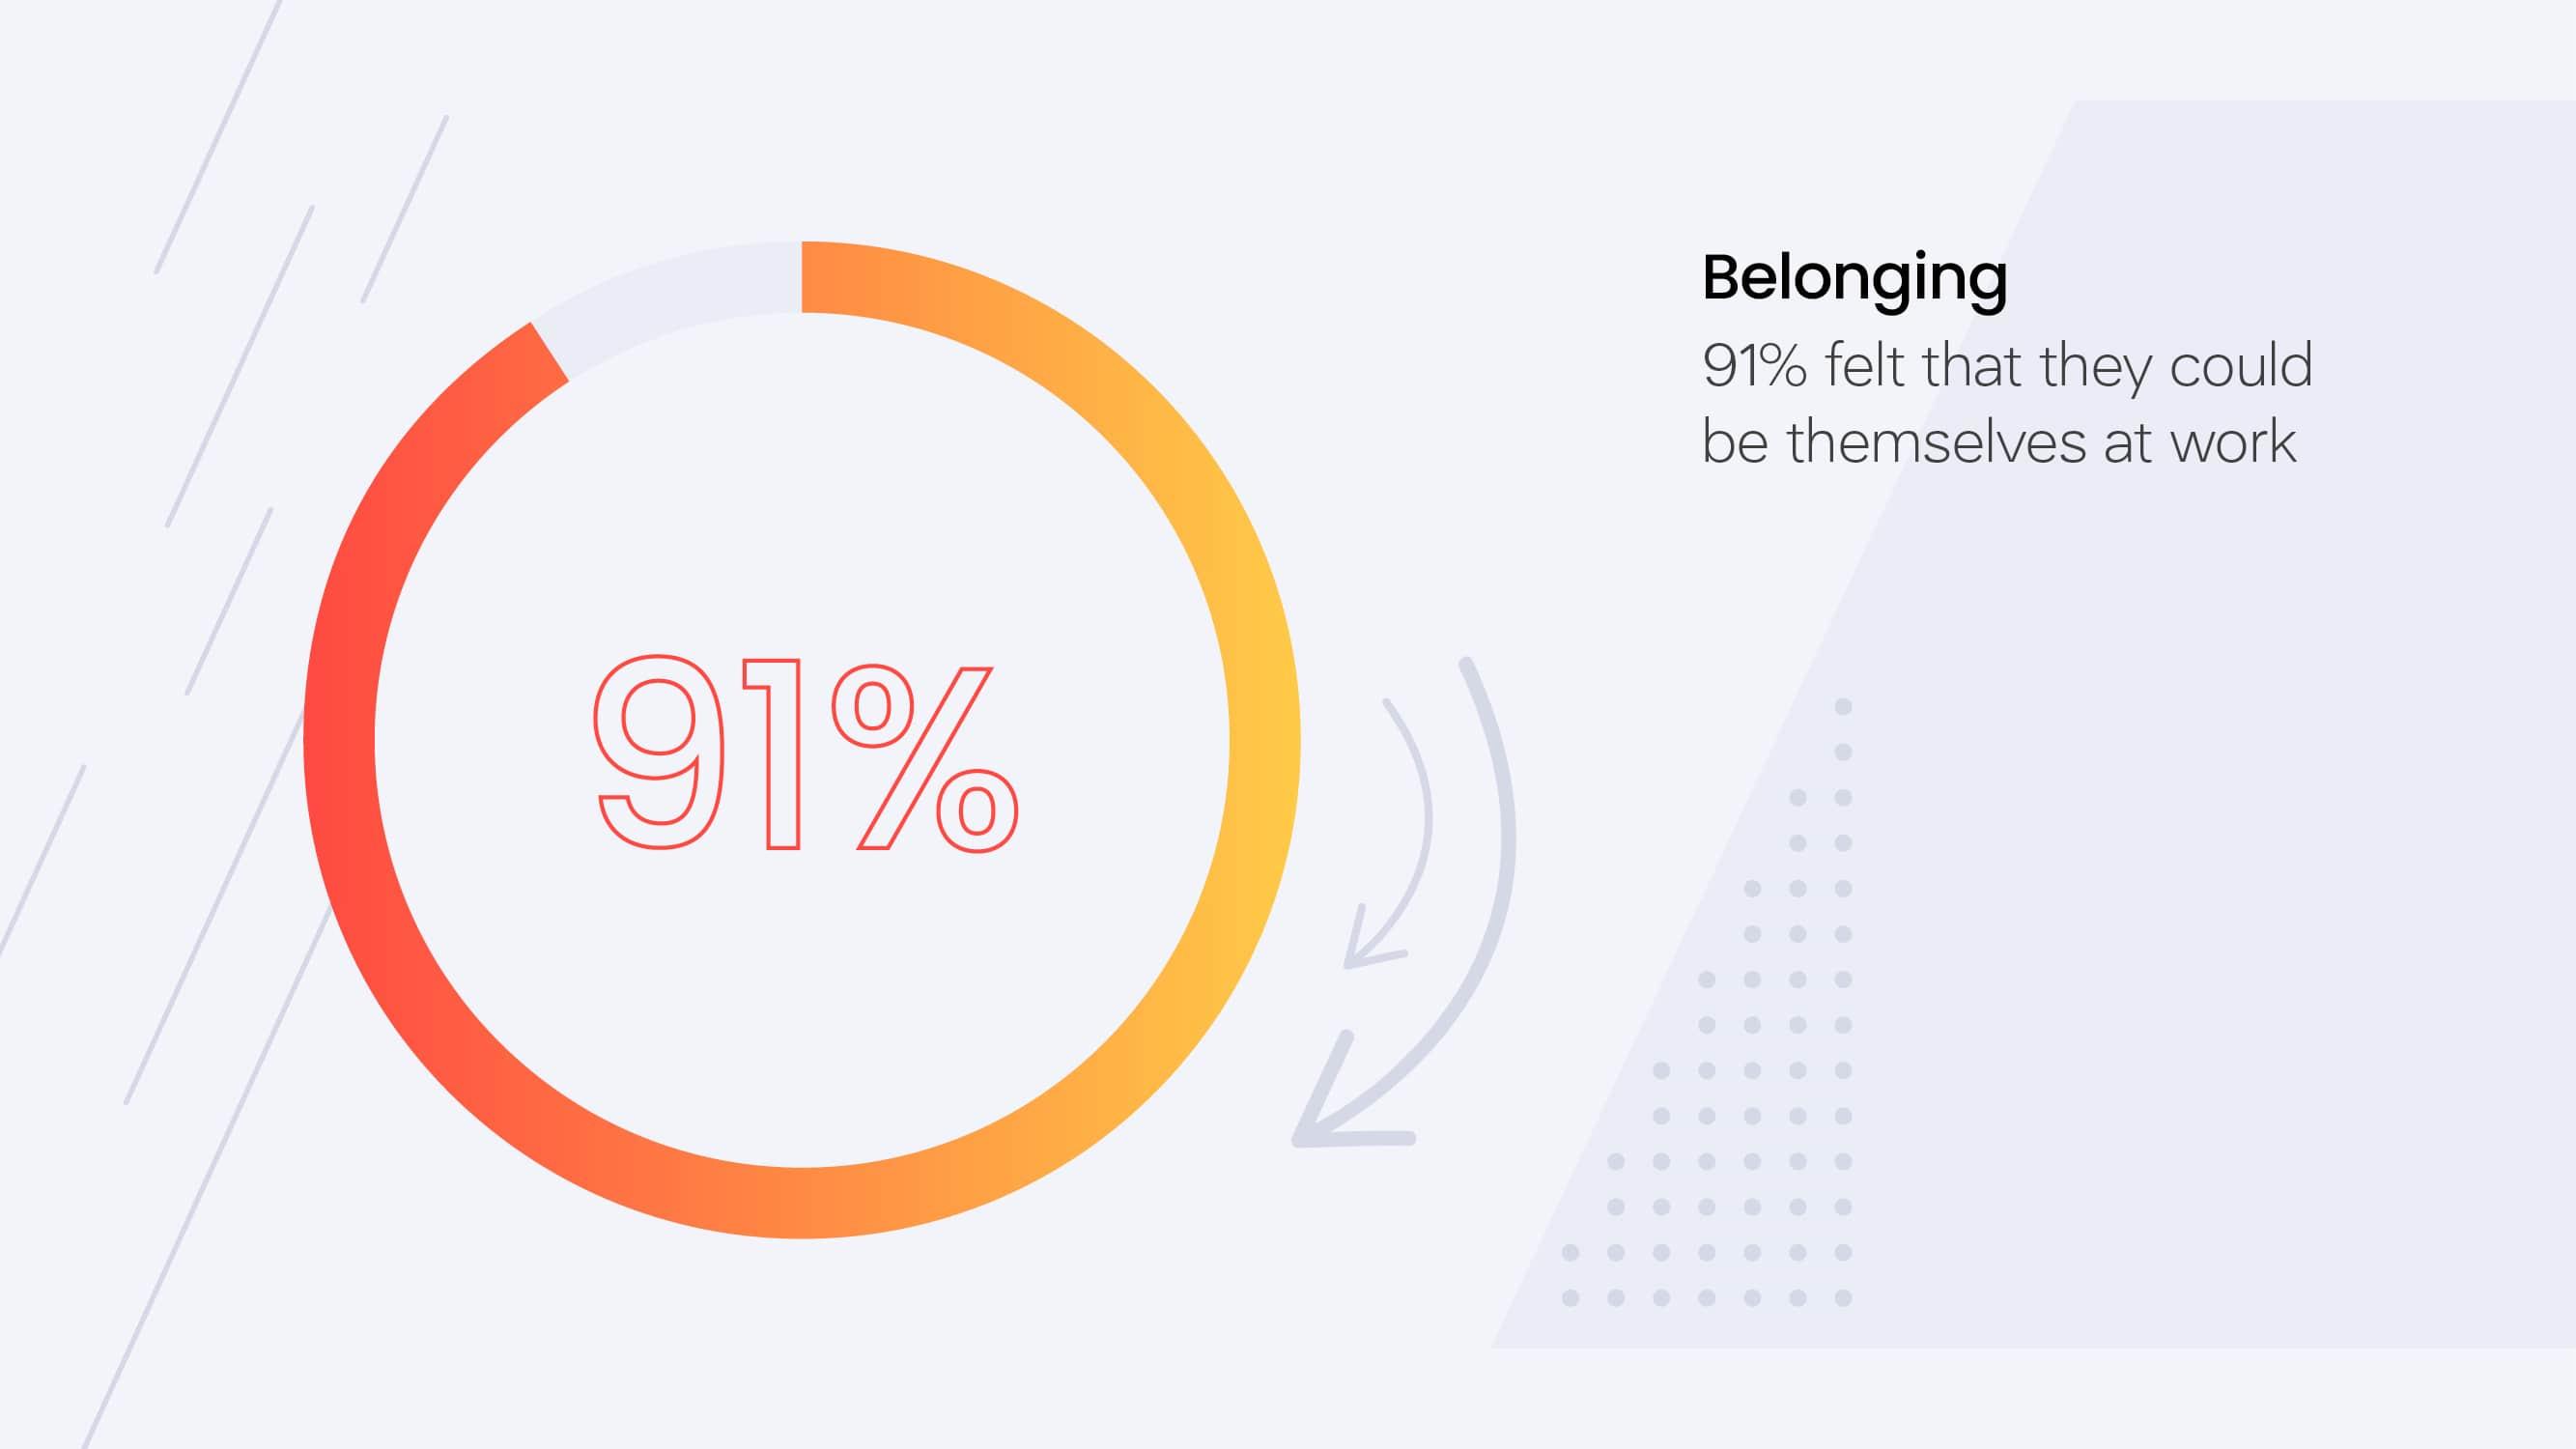 91% of Sensateers feel they can be themselves at work